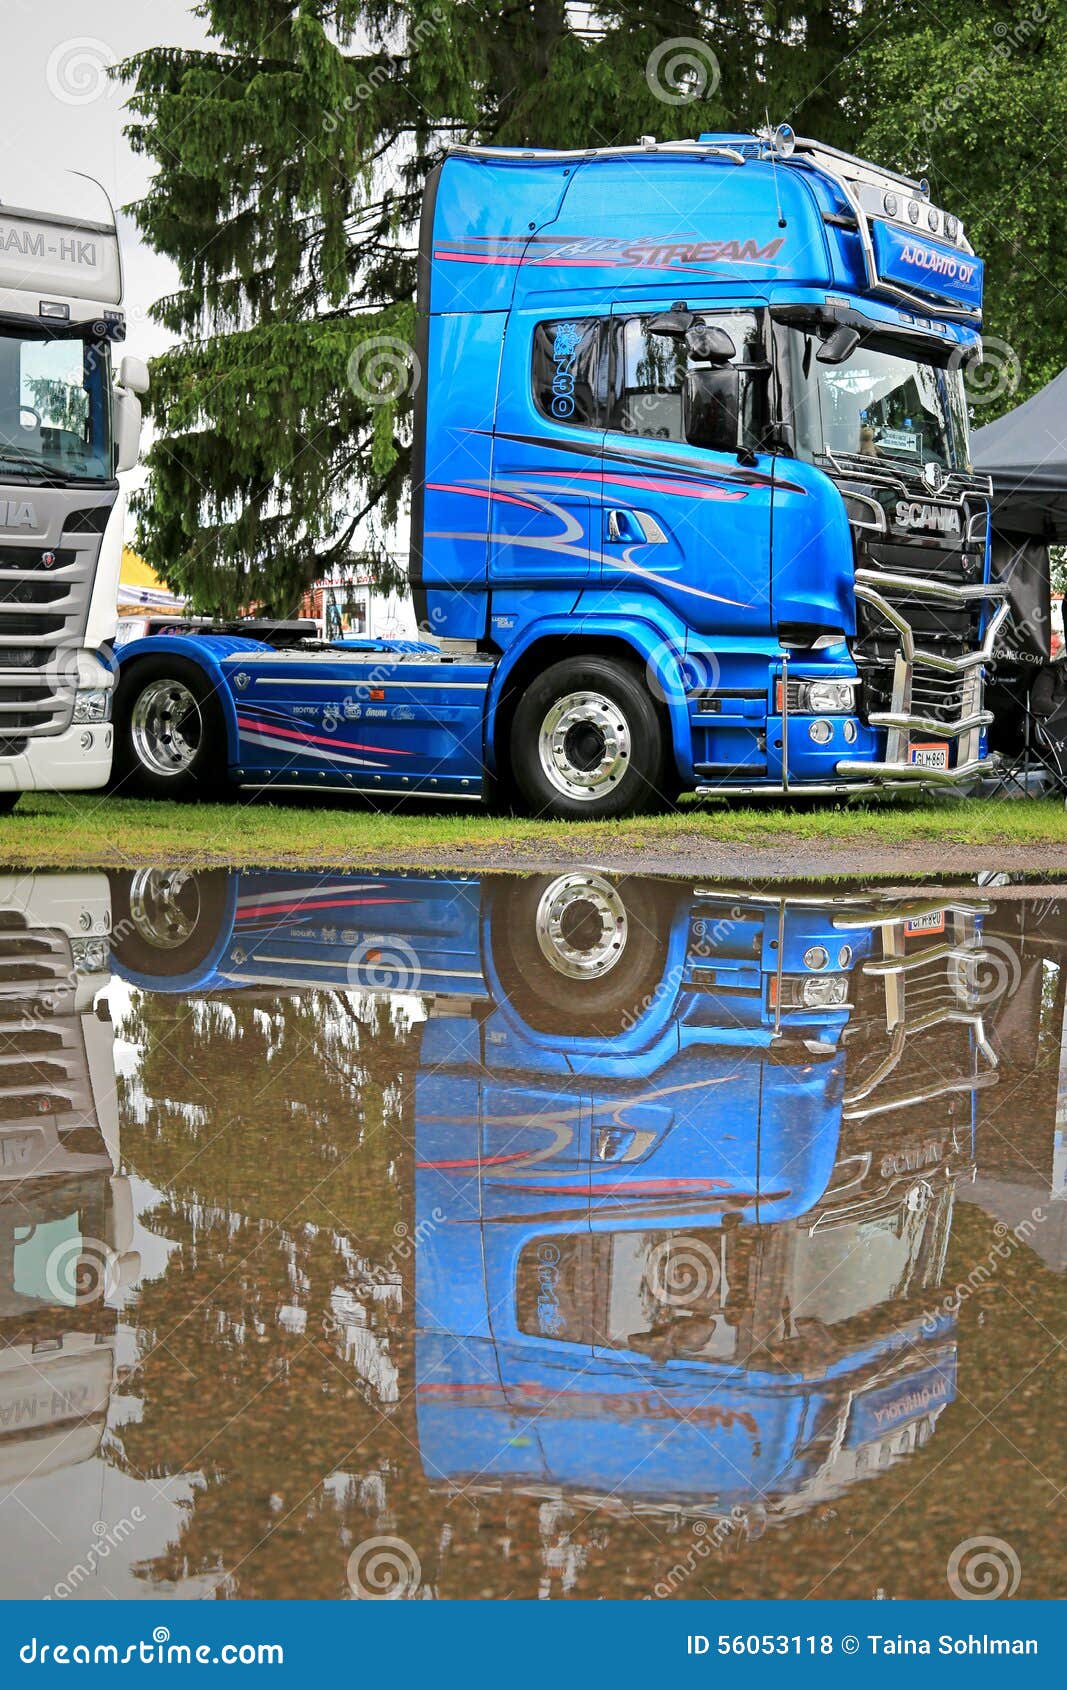 Scania Blue Stream R730 Limited Edition Truck Tractor Editorial Stock Photo 